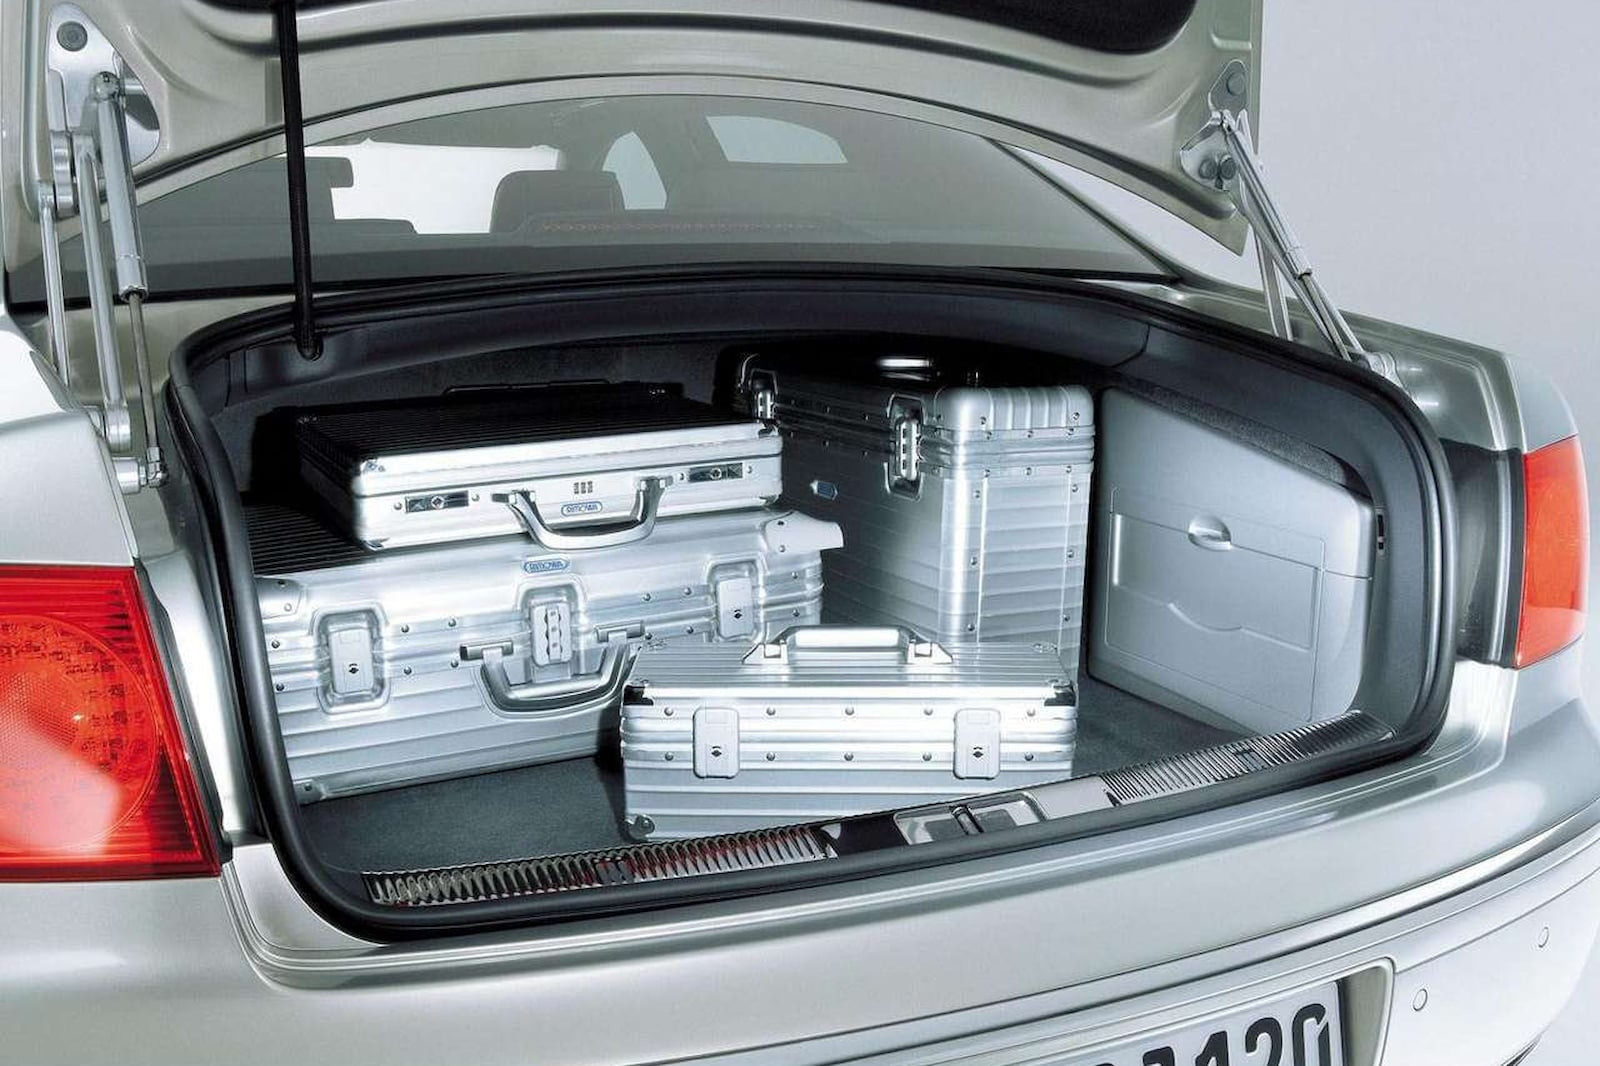 The trunk and little-known things: Mercedes changed everything - Photo 15.